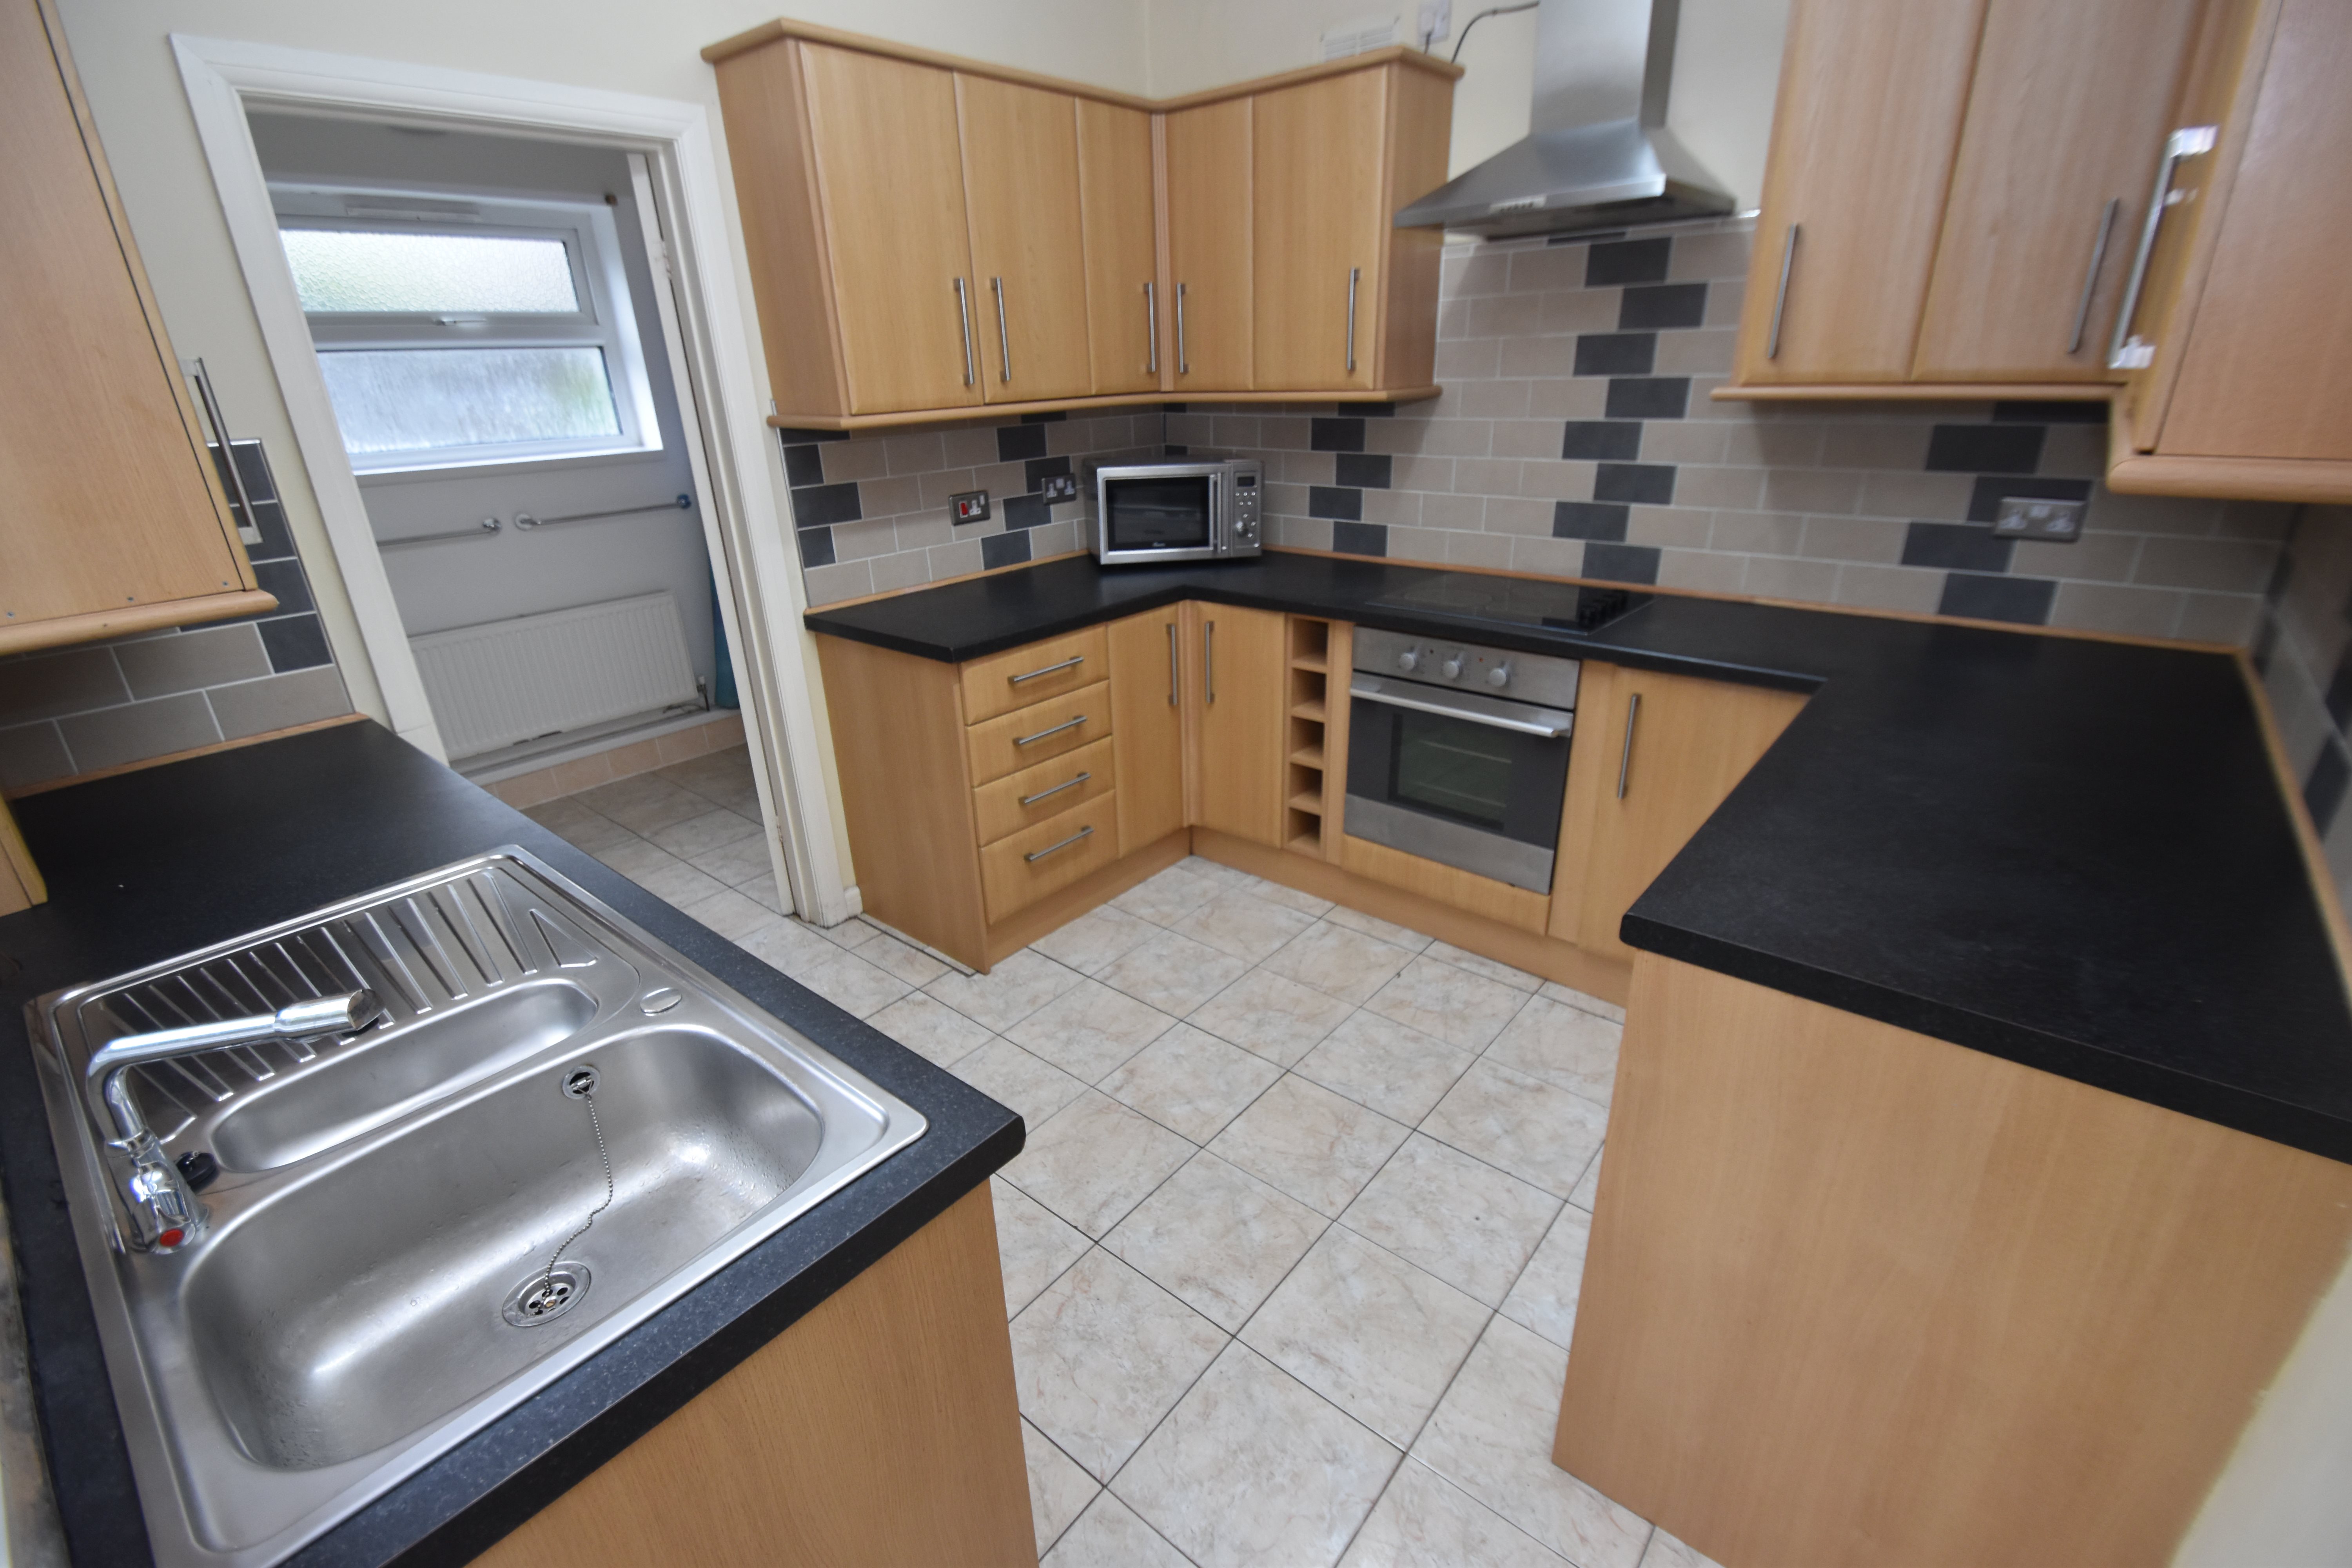 4 bed house to rent in Daniel Street, Cathays - Property Image 1